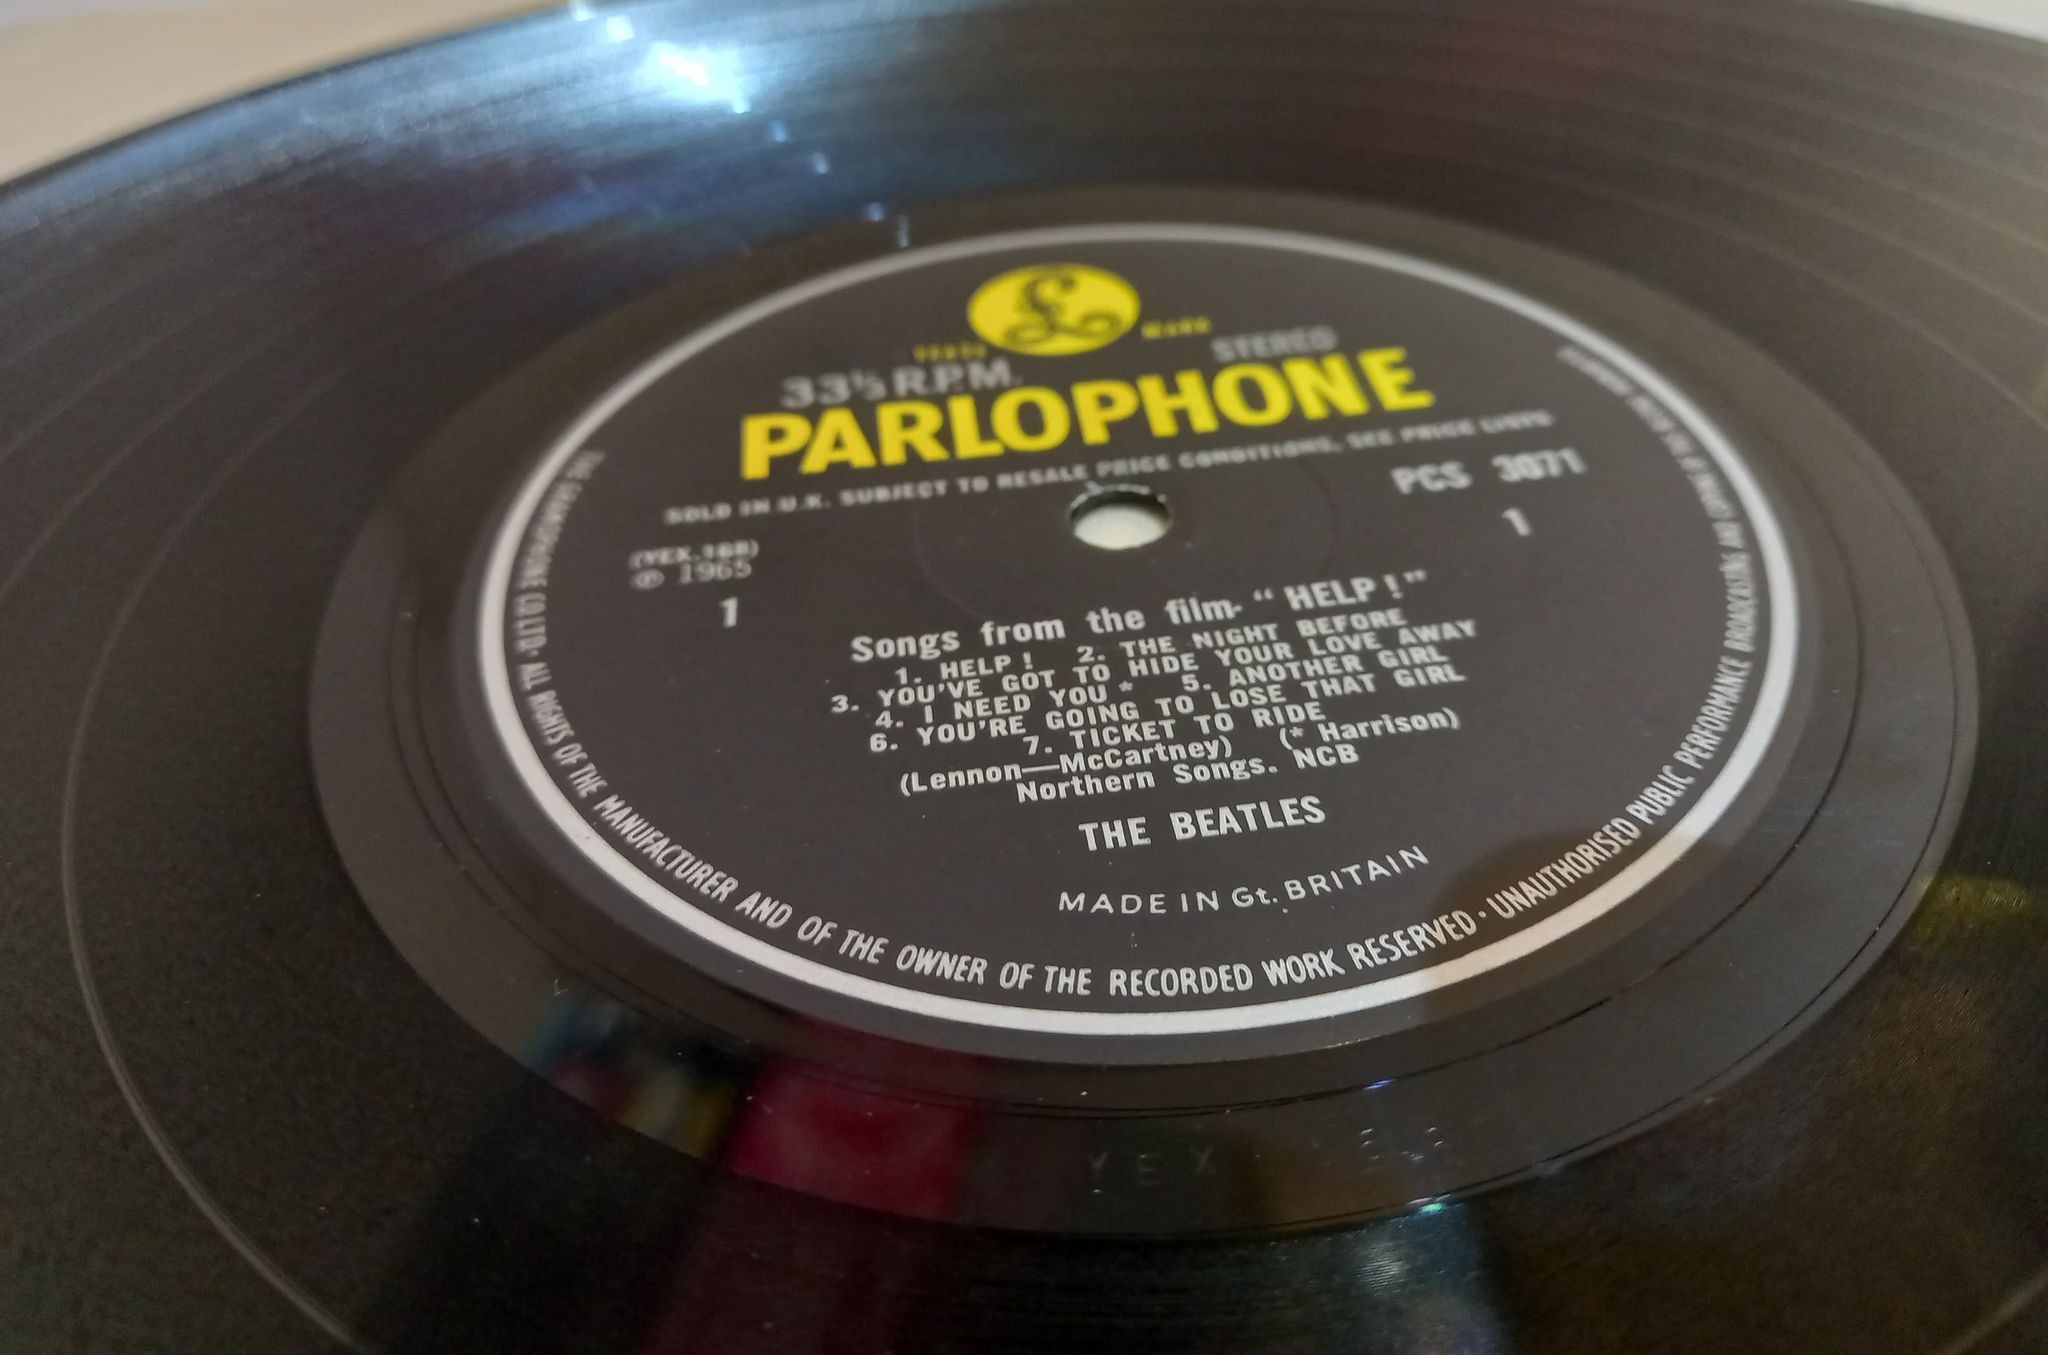 The Beatles HELP! PCS 3071 UK Stereo Black and Yellow Label Parlophone Album excellent condition - Image 5 of 5